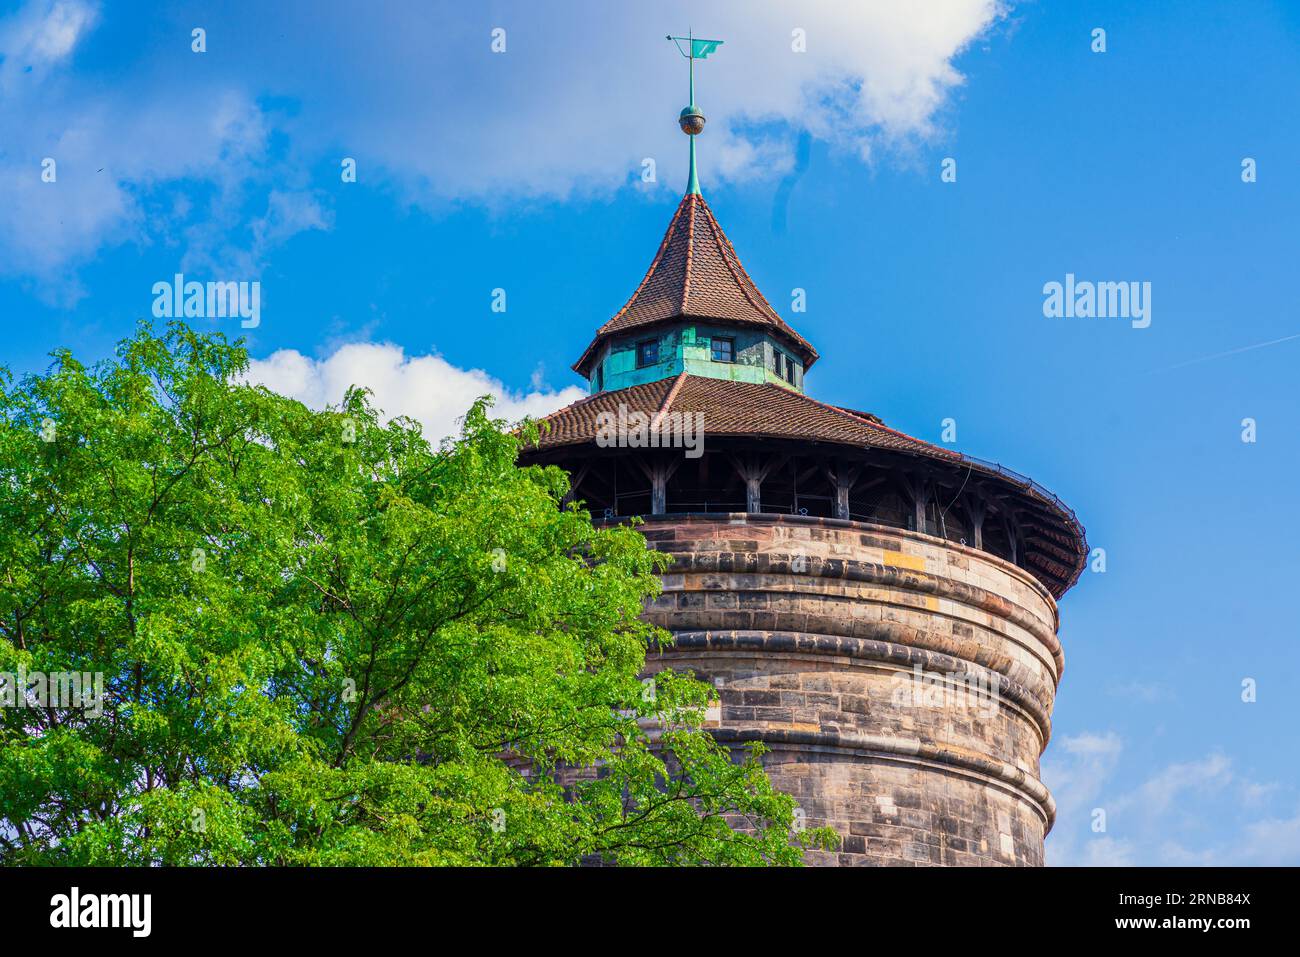 Exterior view of the Frauentorturm, fortified medieval tower in Nuremberg Old Town District, Germany Stock Photo